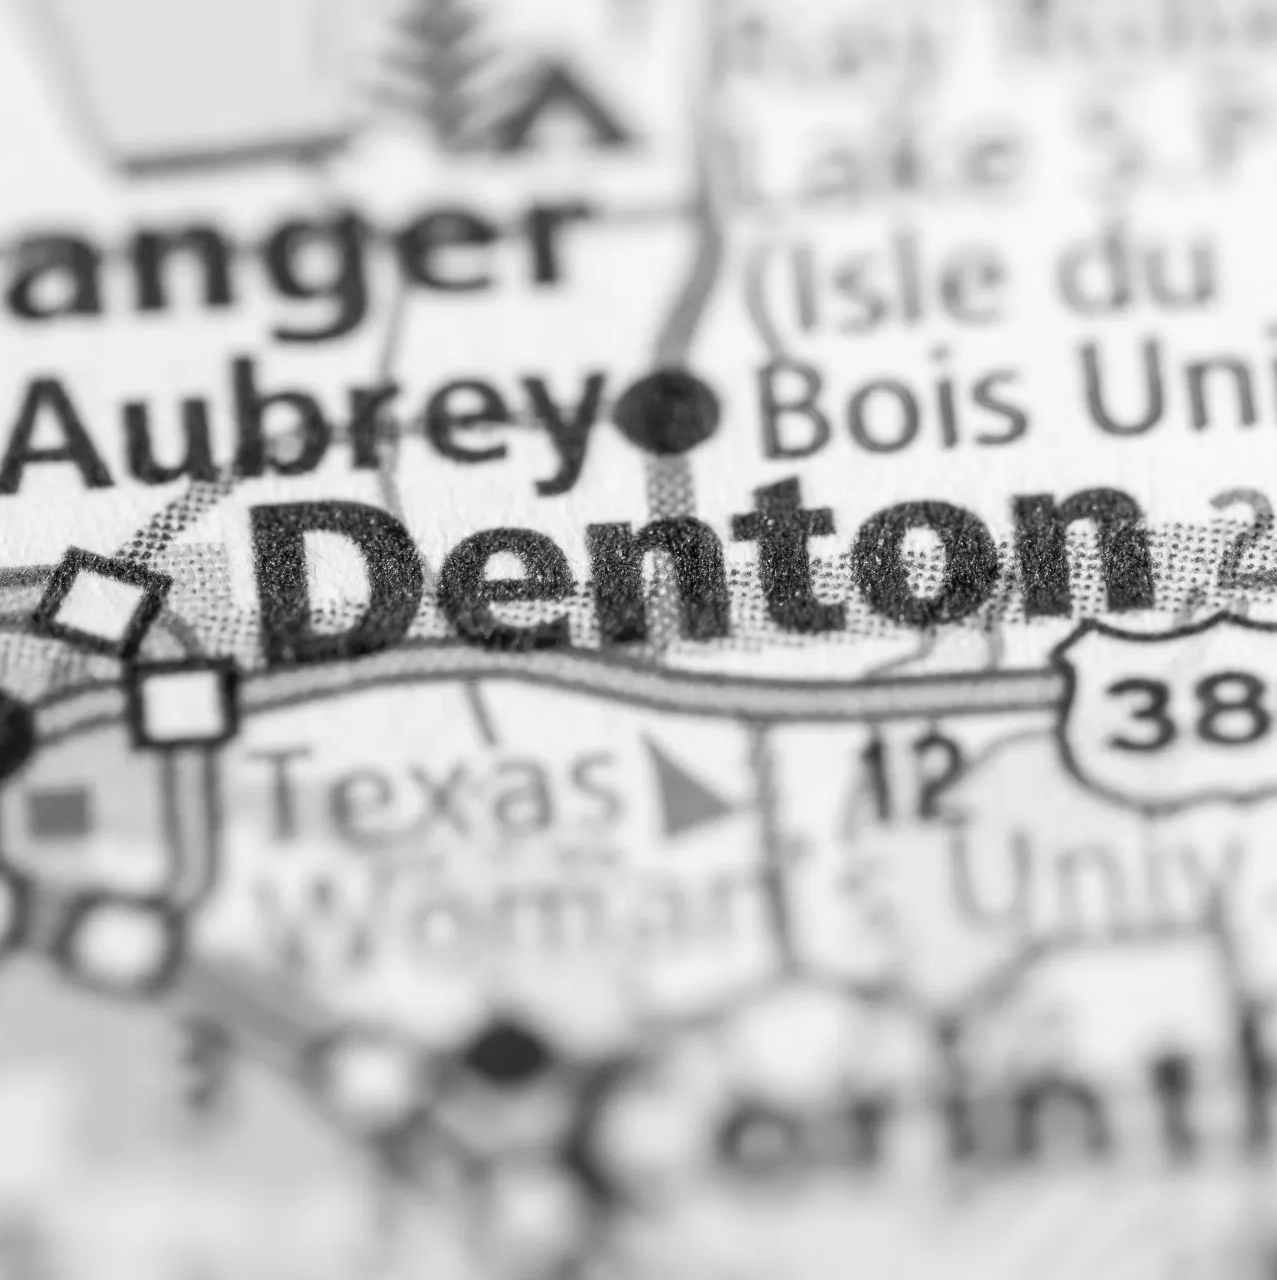 A black and white photo of a map of denton texas